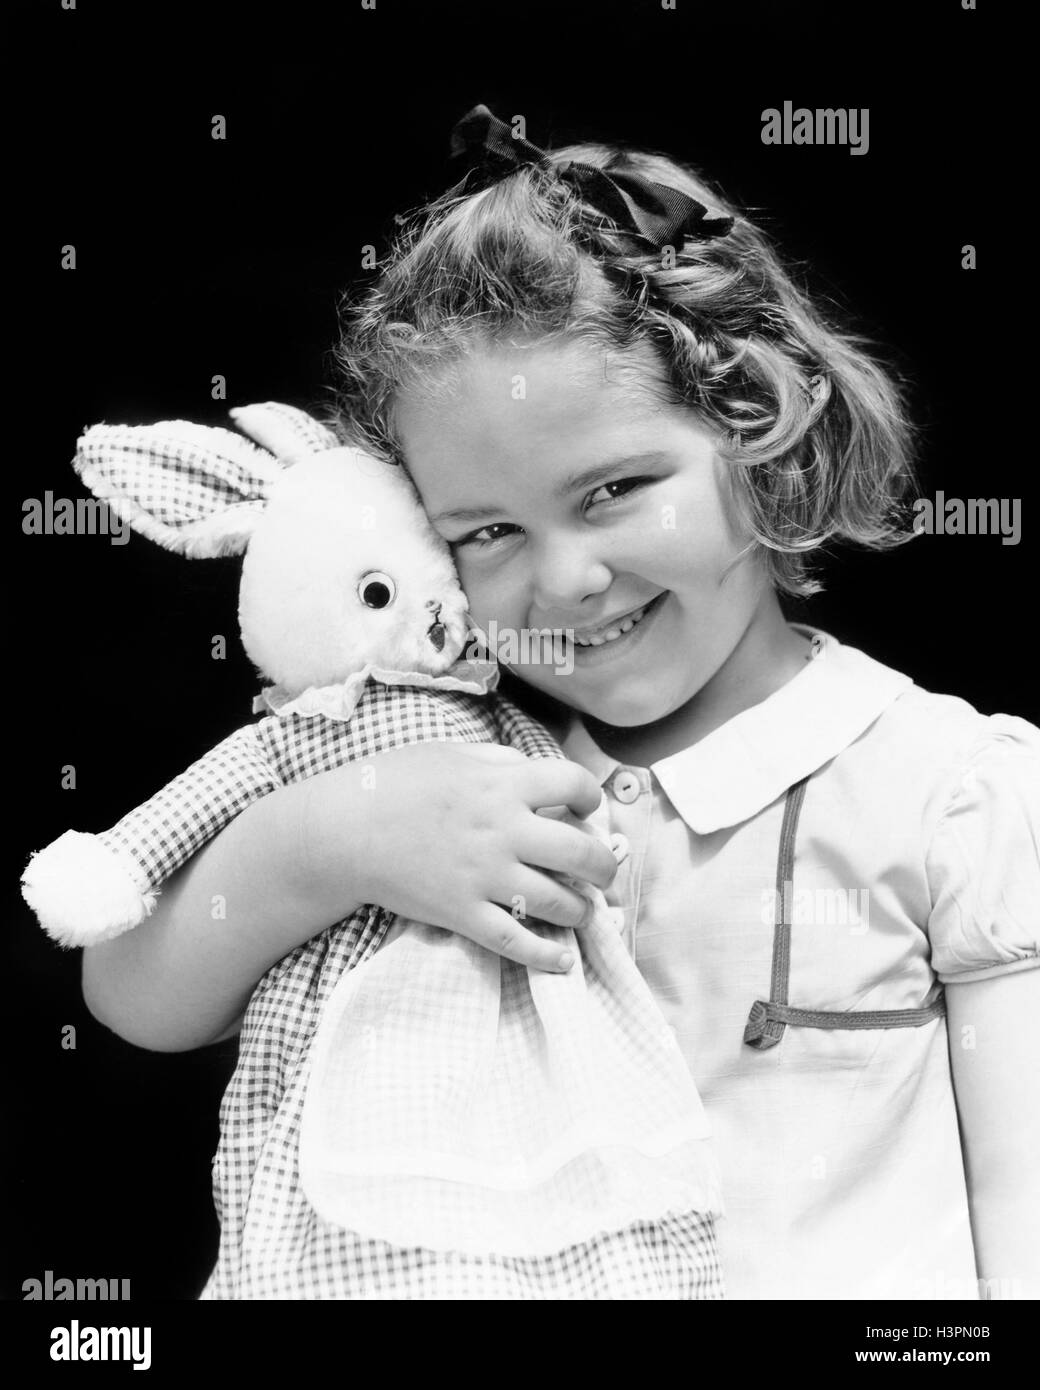 1930s 1940s SMILING YOUNG GIRL LOOKING AT CAMERA HOLDING HUGGING STUFFED RABBIT TOY ANIMAL Stock Photo